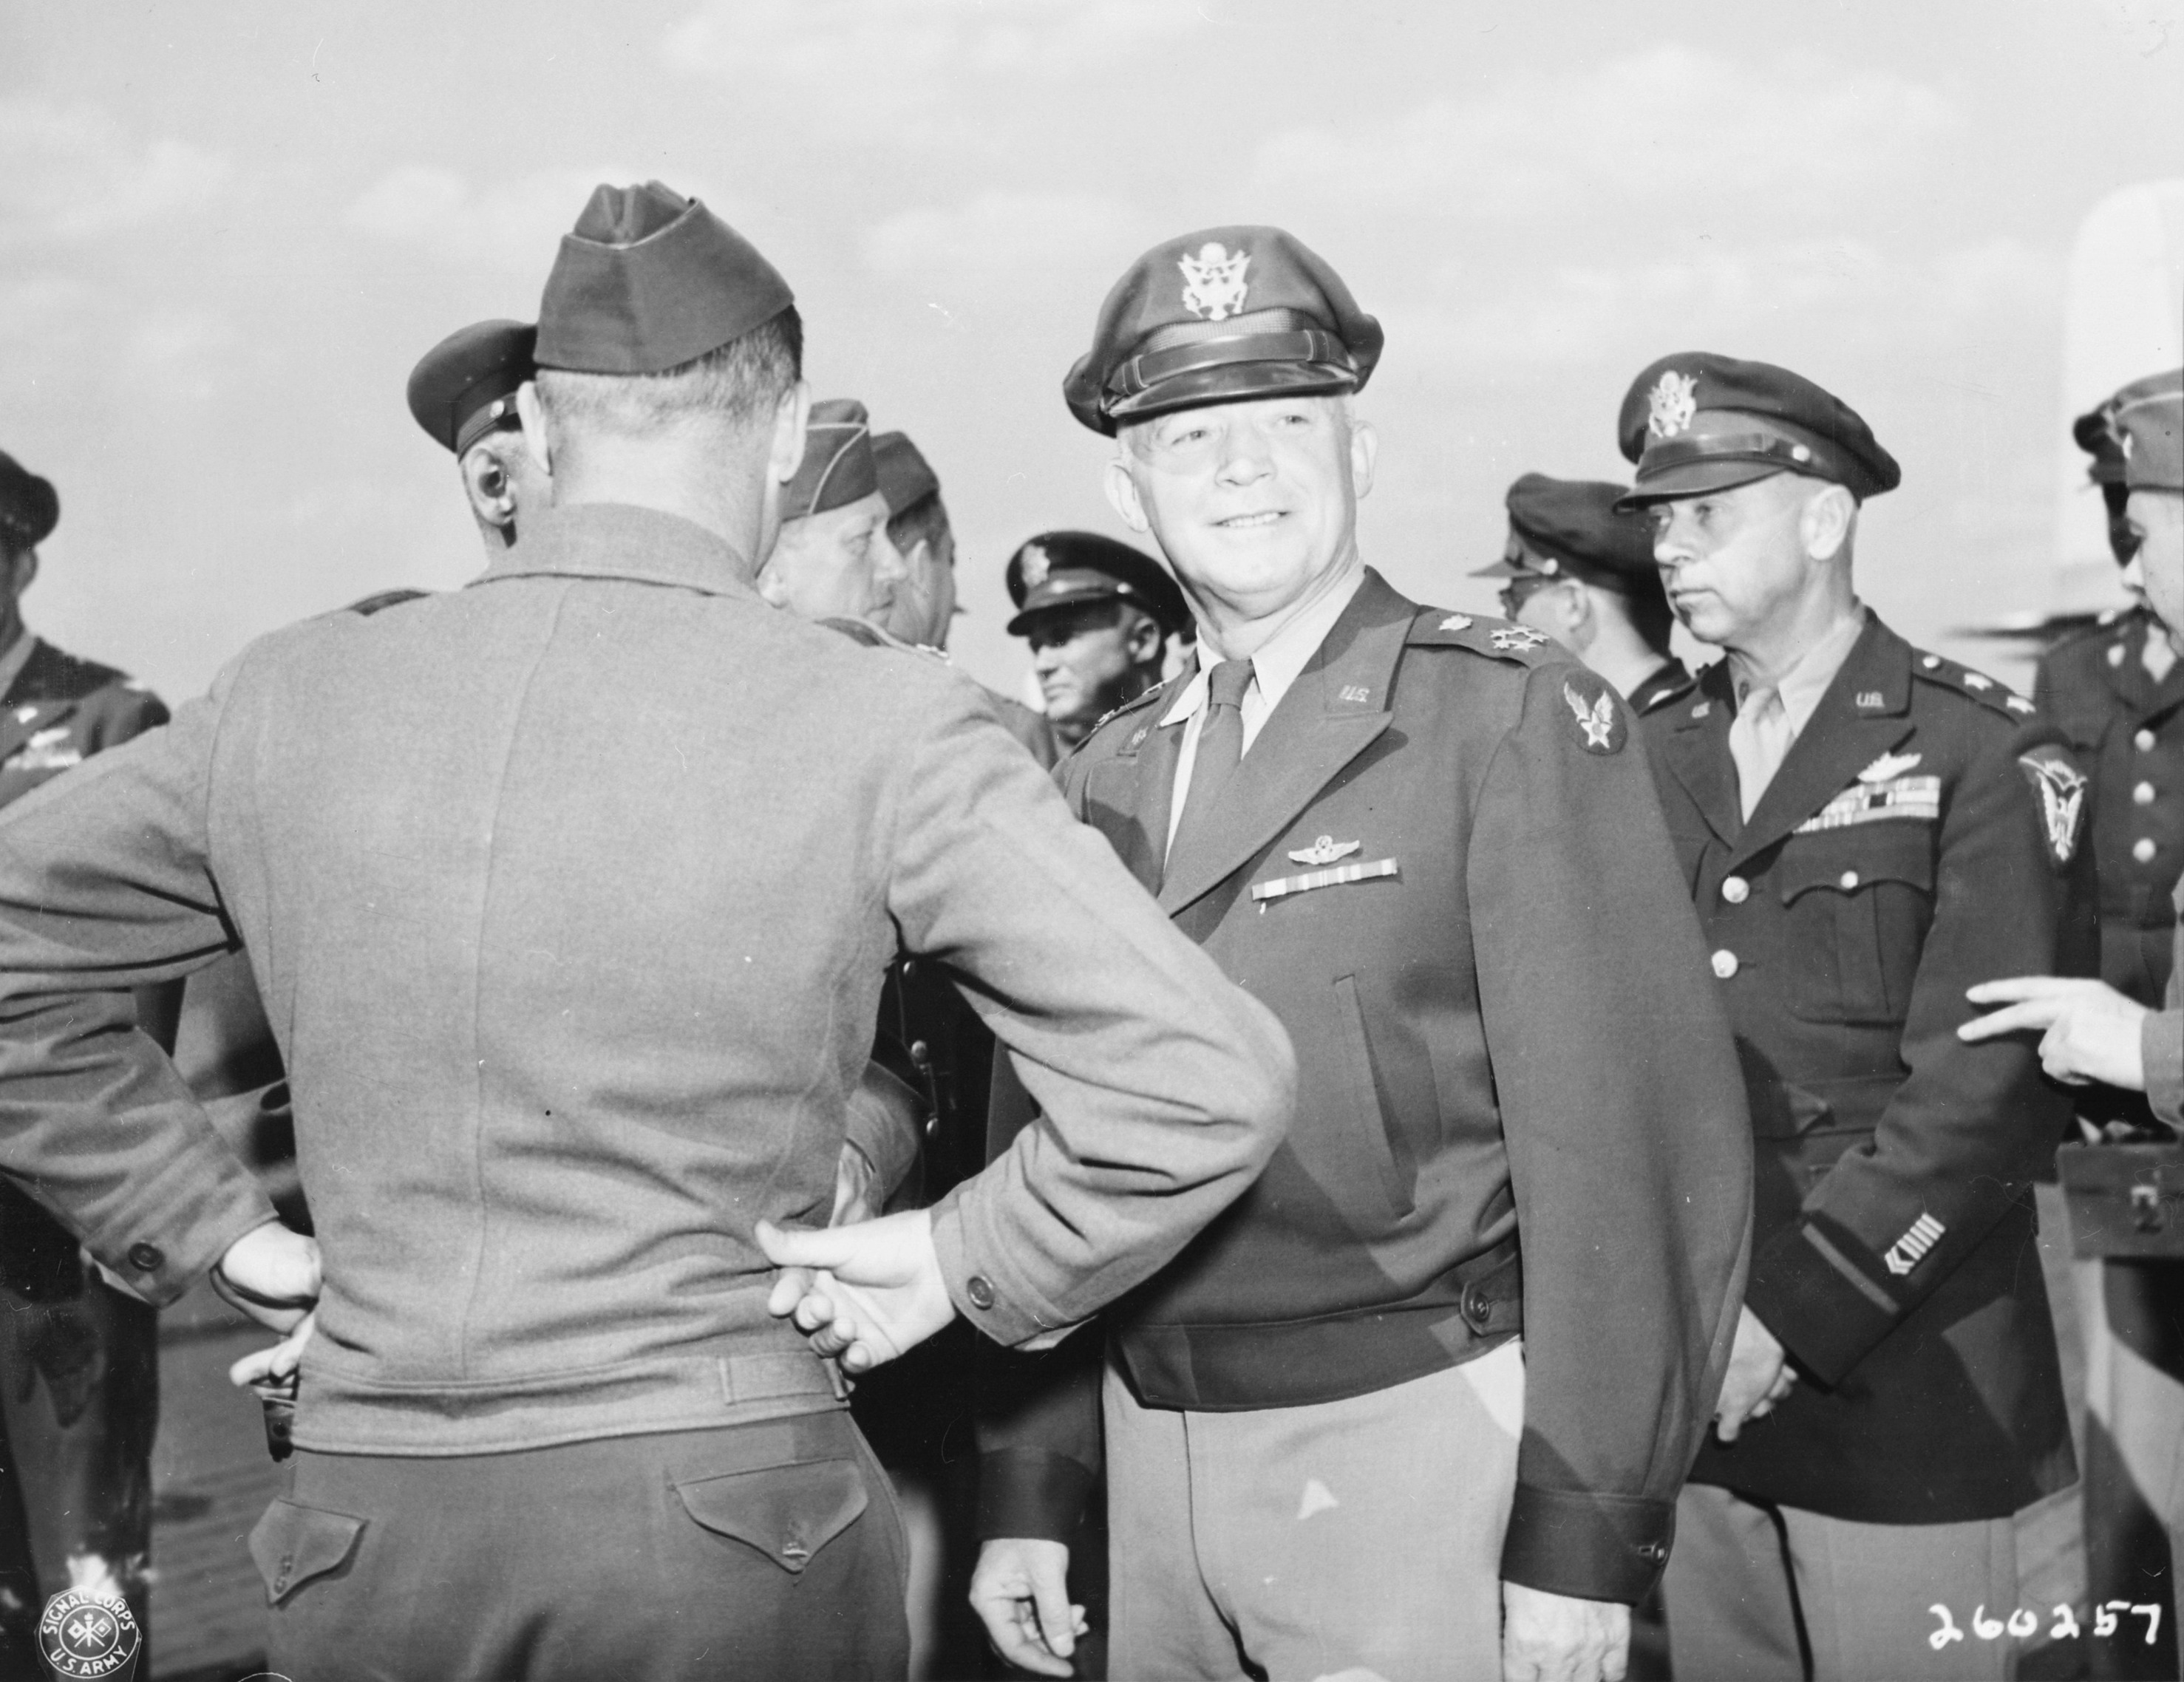 General Henry Arnold and his son Lieutenant Colonel Henry Arnold at Berlin-Gatow airfield, Germany, 15 Jul 1945